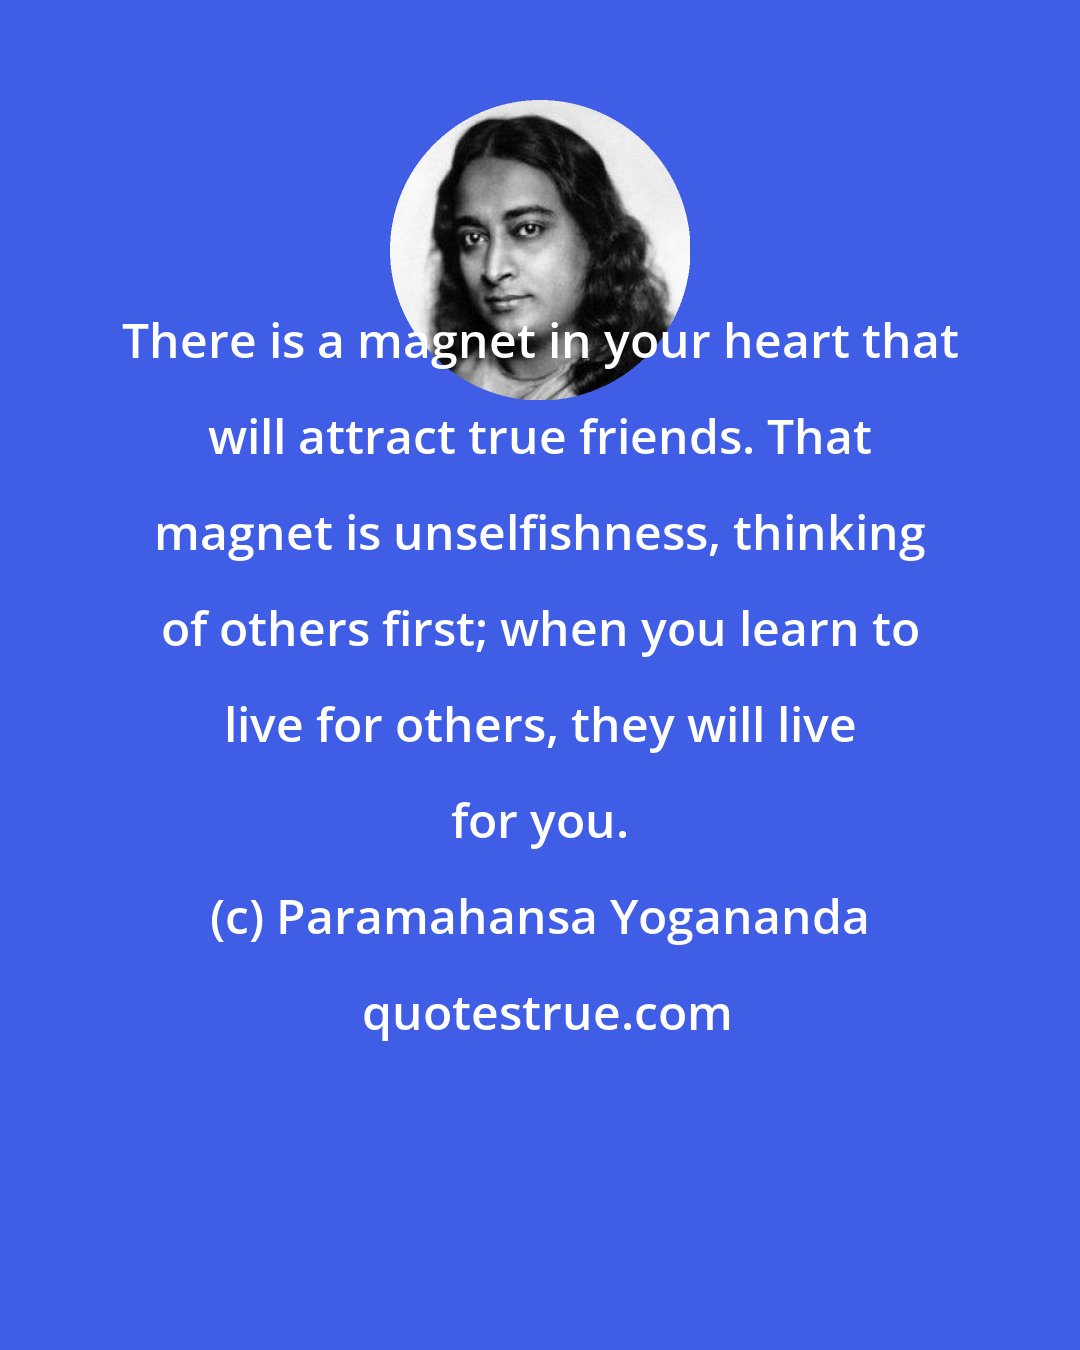 Paramahansa Yogananda: There is a magnet in your heart that will attract true friends. That magnet is unselfishness, thinking of others first; when you learn to live for others, they will live for you.